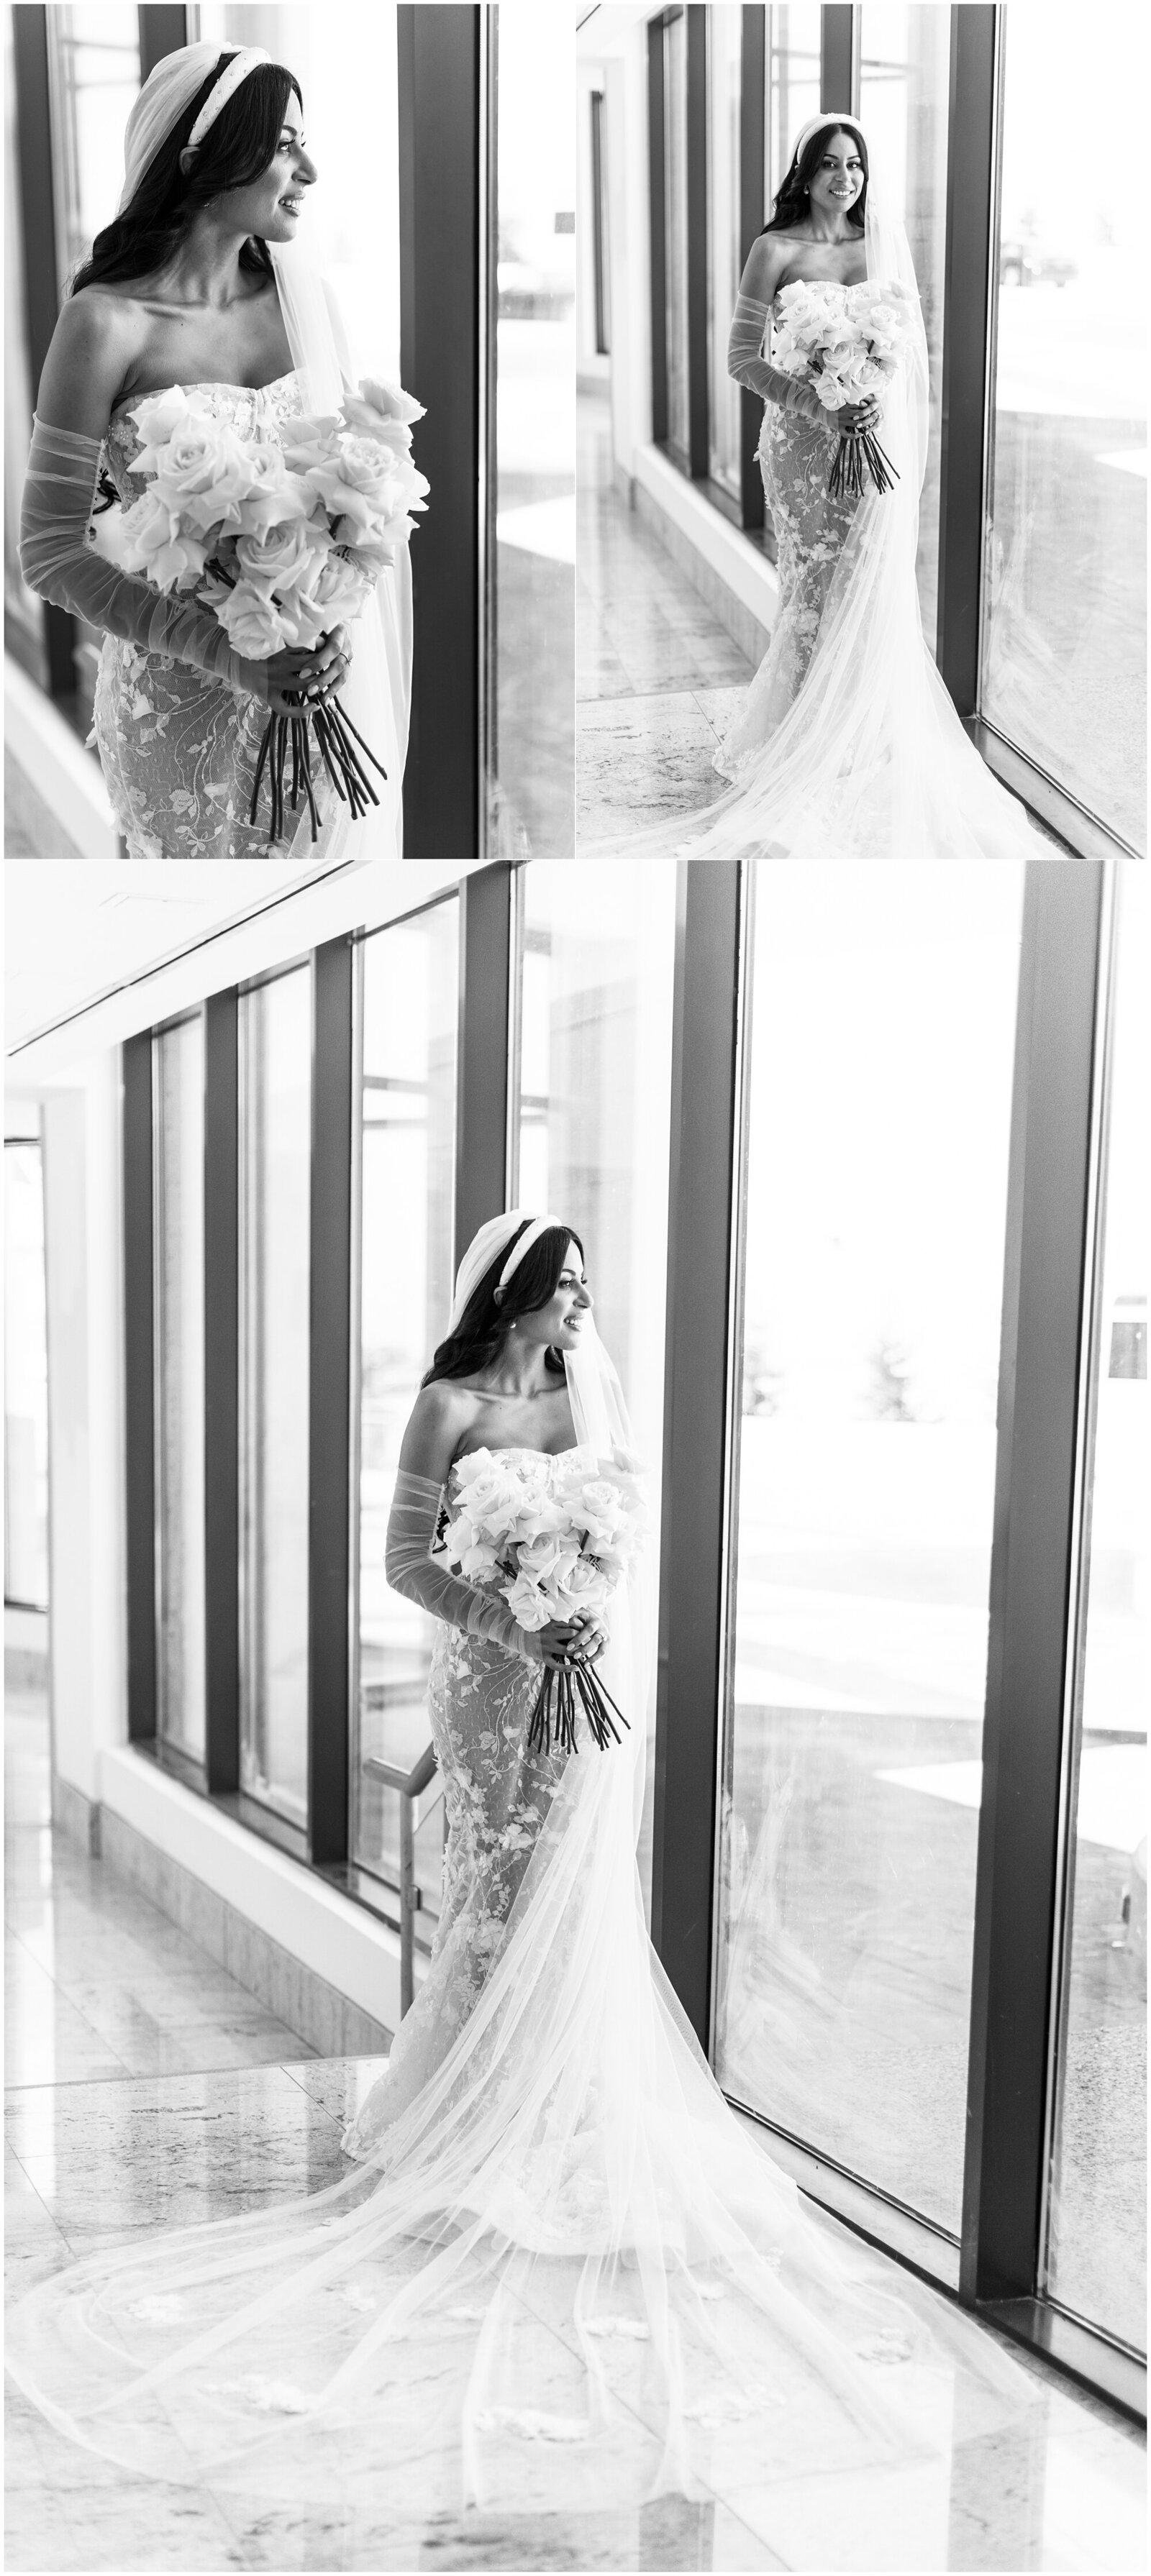 Bride with a white roses bouquet wearing a veil and a headband matching her bridal dress with sheer corset design and lace flower details in the GTA